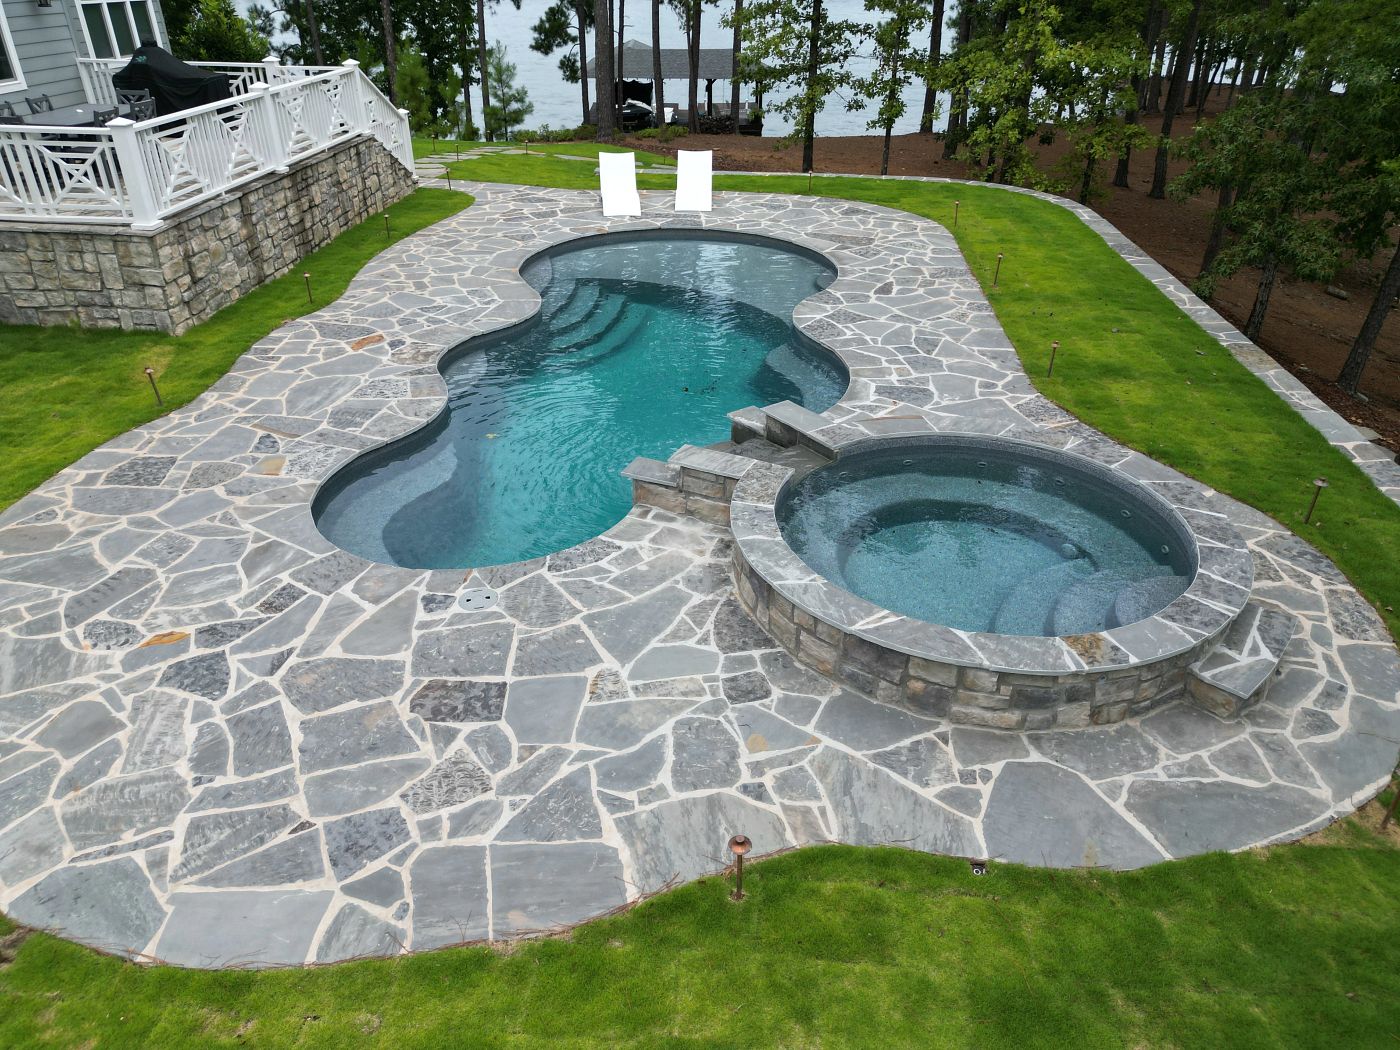 Fiberglass pool and spa with custom water feature in southern backyard.